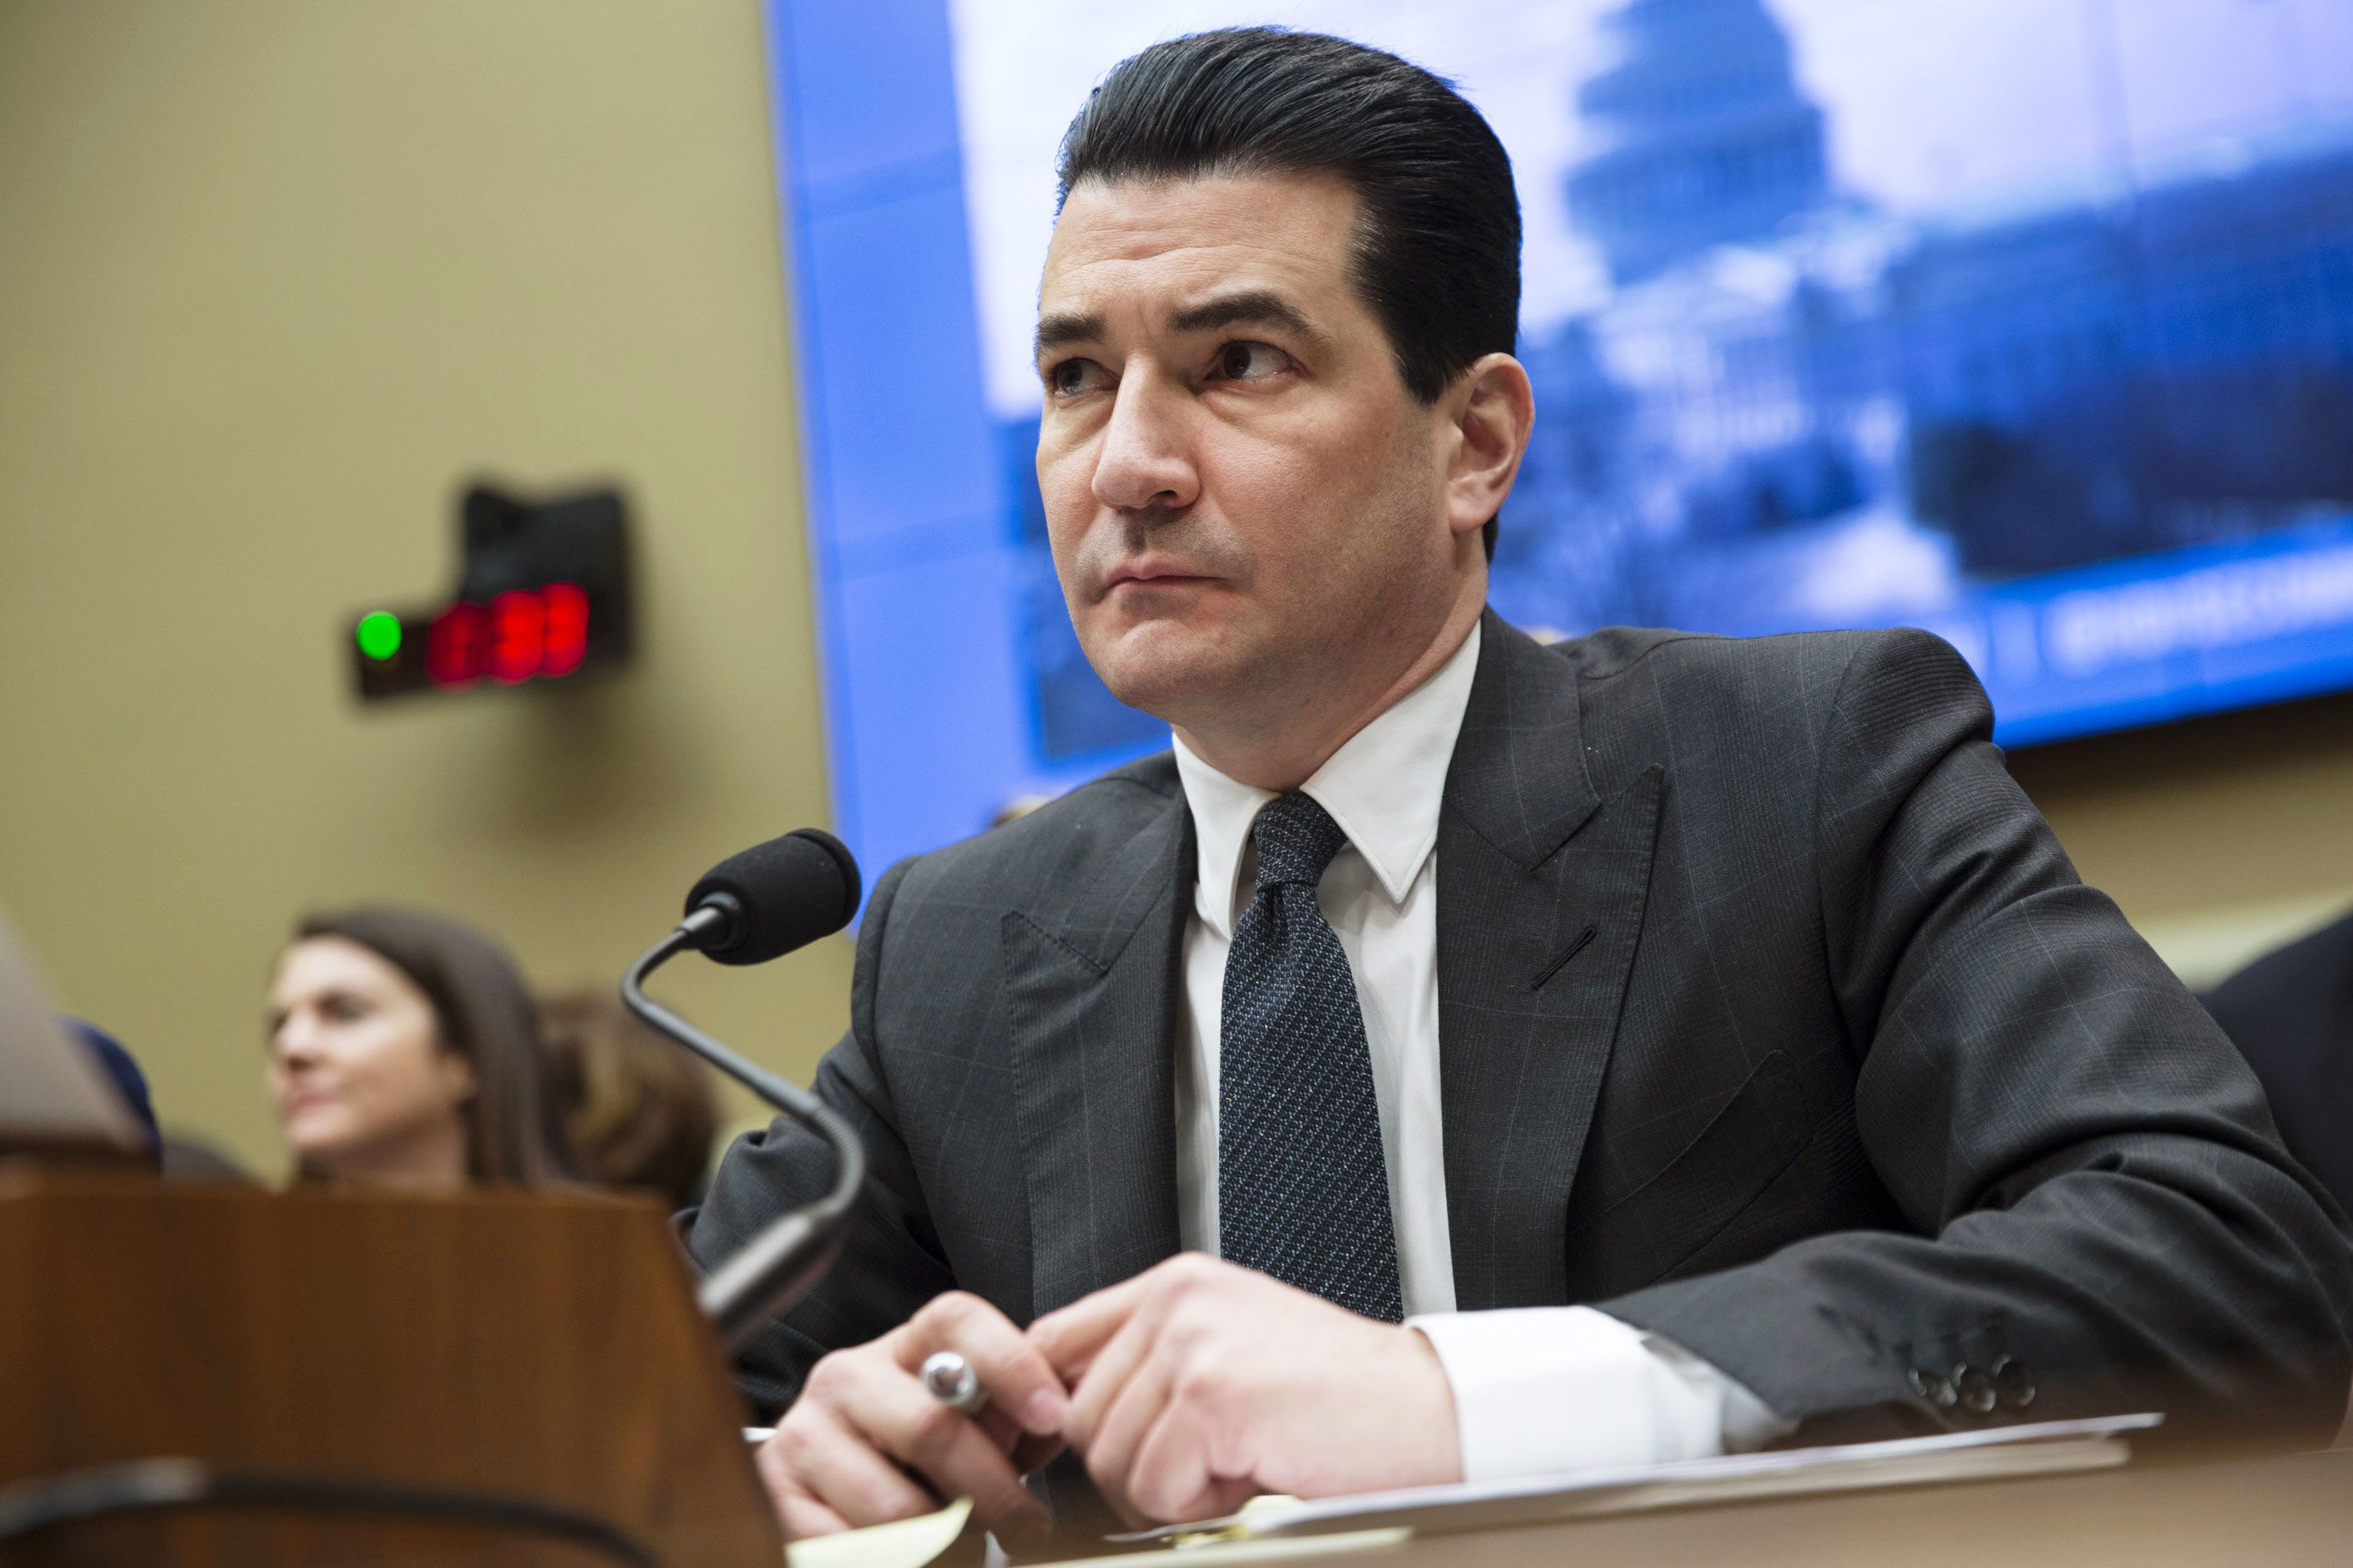 Scott Gottlieb says 'Medicare for All' would be innovation-stifling